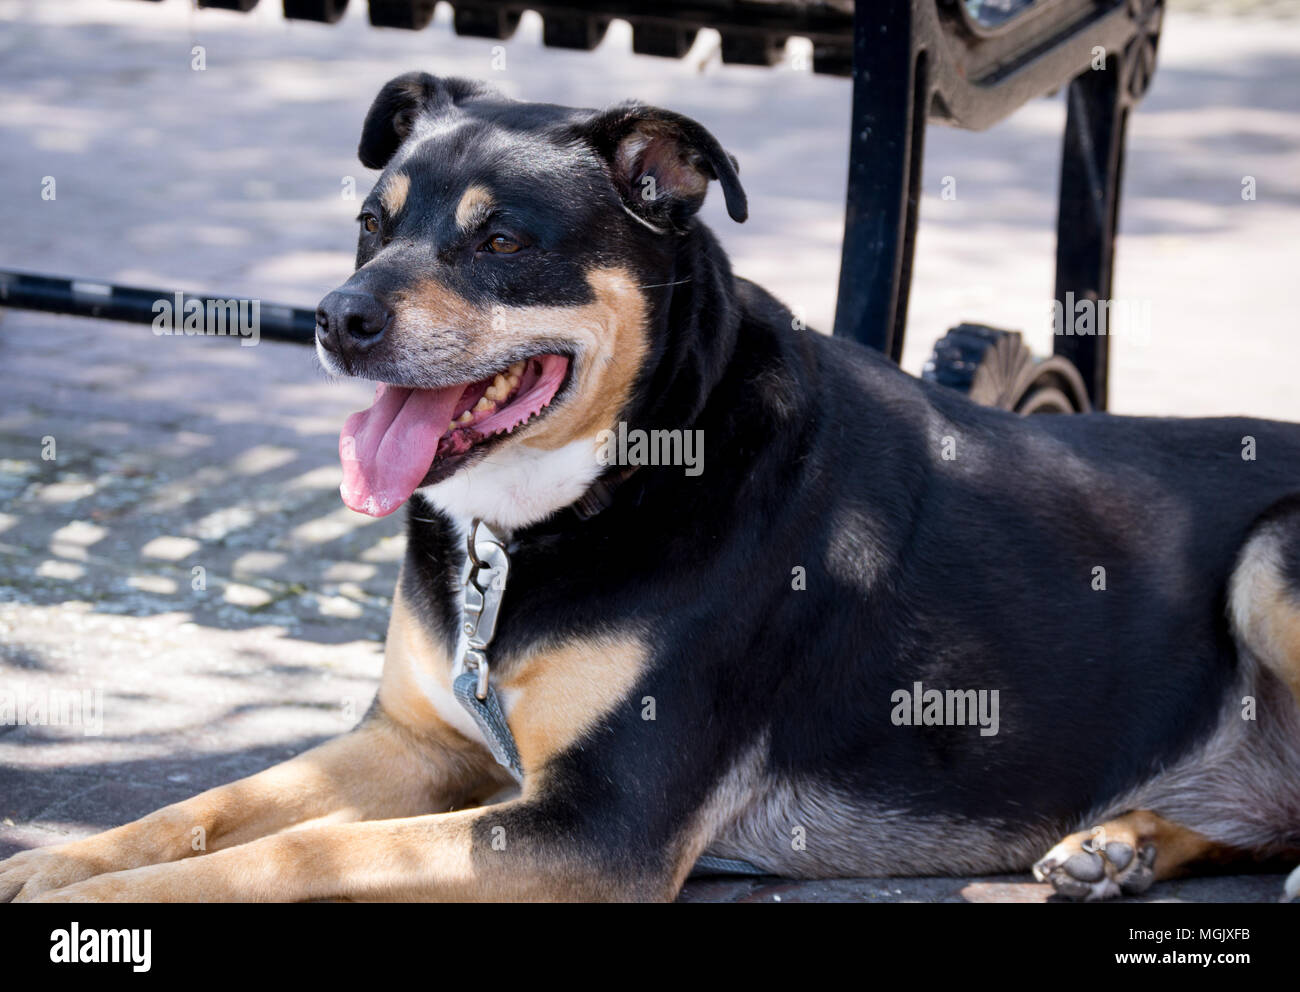 Walking the Dog. Pound rescue labrador, rottweiler mixed adult male dog rests near a park bench during a city walk. Stock Photo